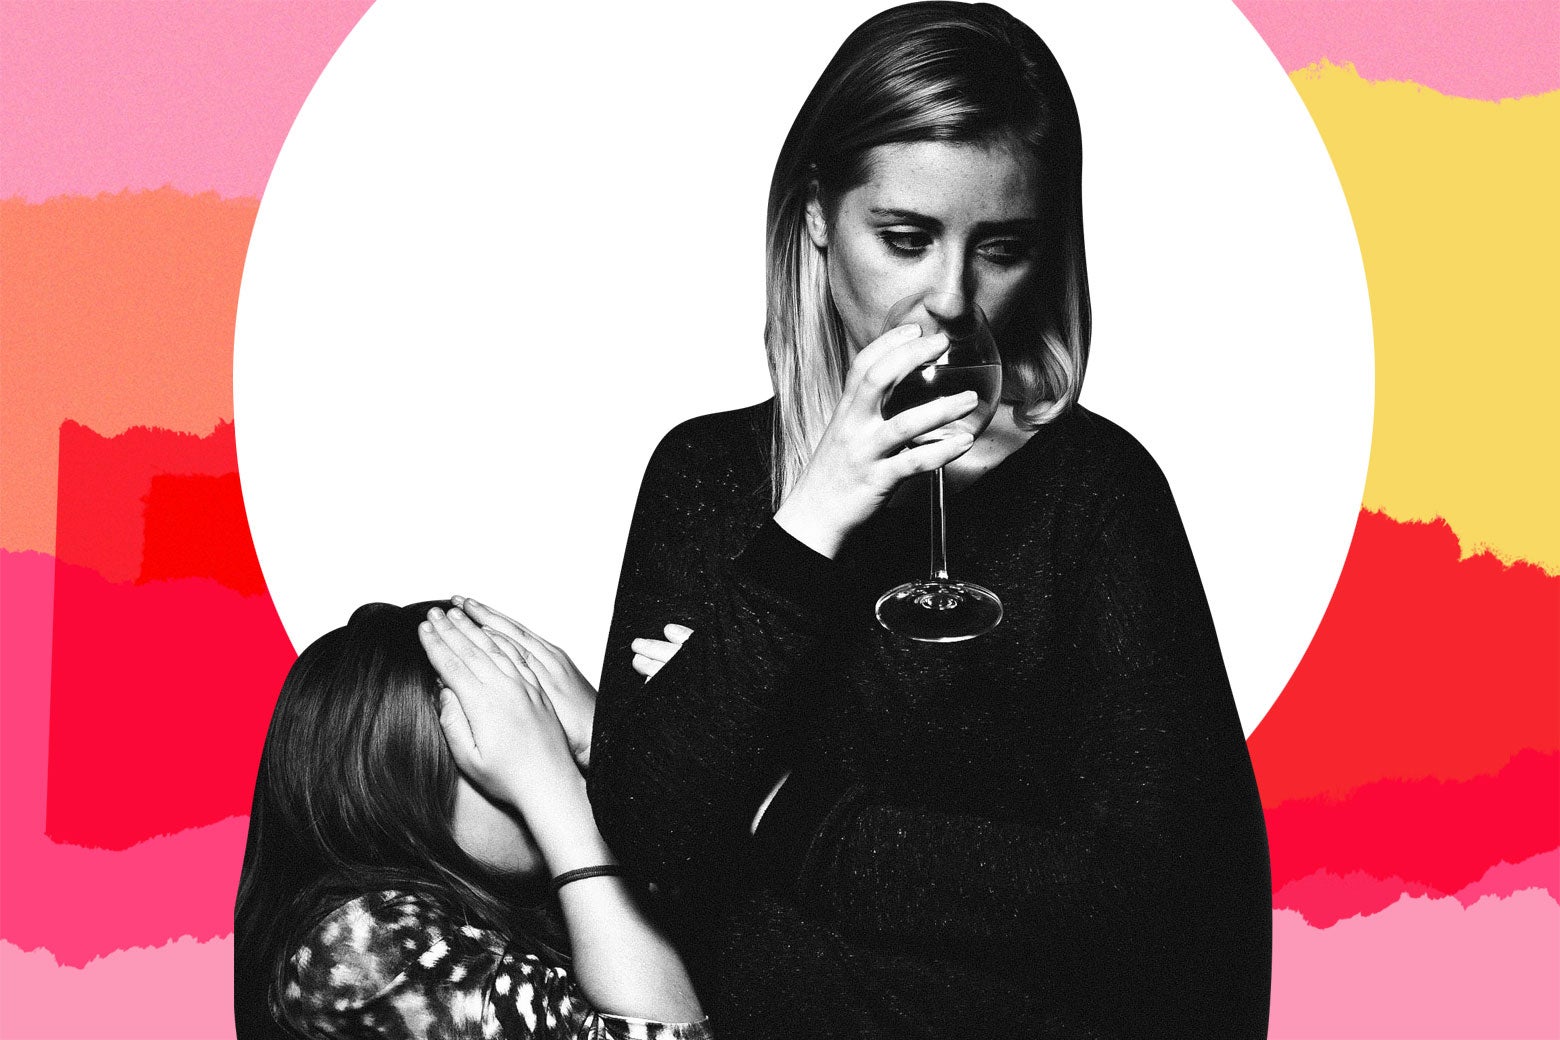 A mom drinking wine in front of her child.